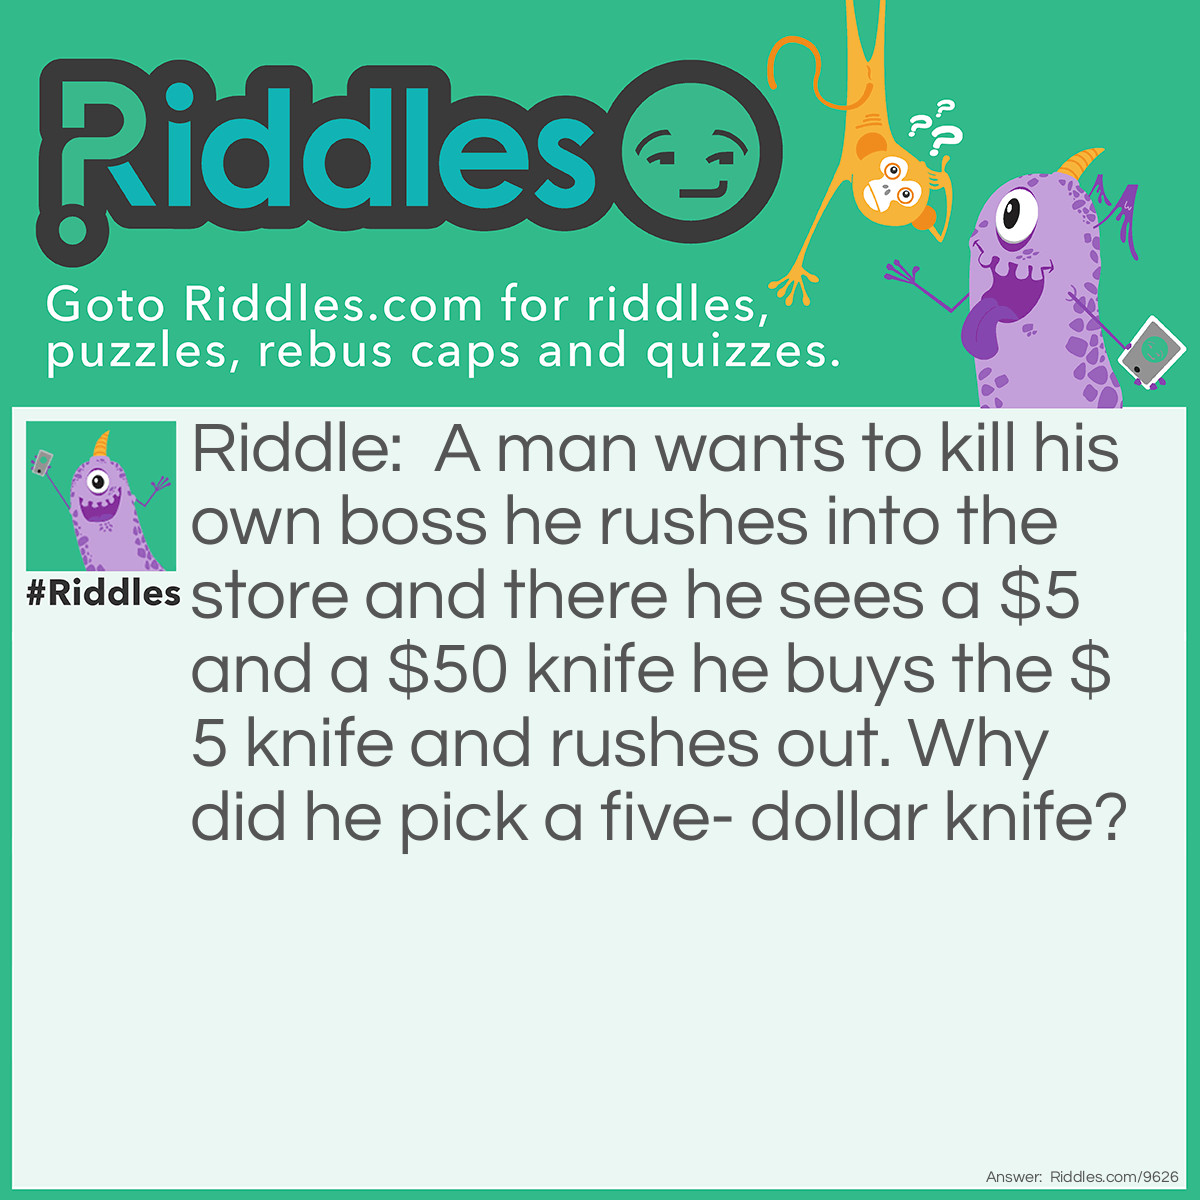 Riddle: A man wants to kill his own boss he rushes into the store and there he sees a $5 and a $50 knife he buys the $5 knife and rushes out. Why did he pick a five- dollar knife? Answer: To kill the boss more painfully with a dull knife.